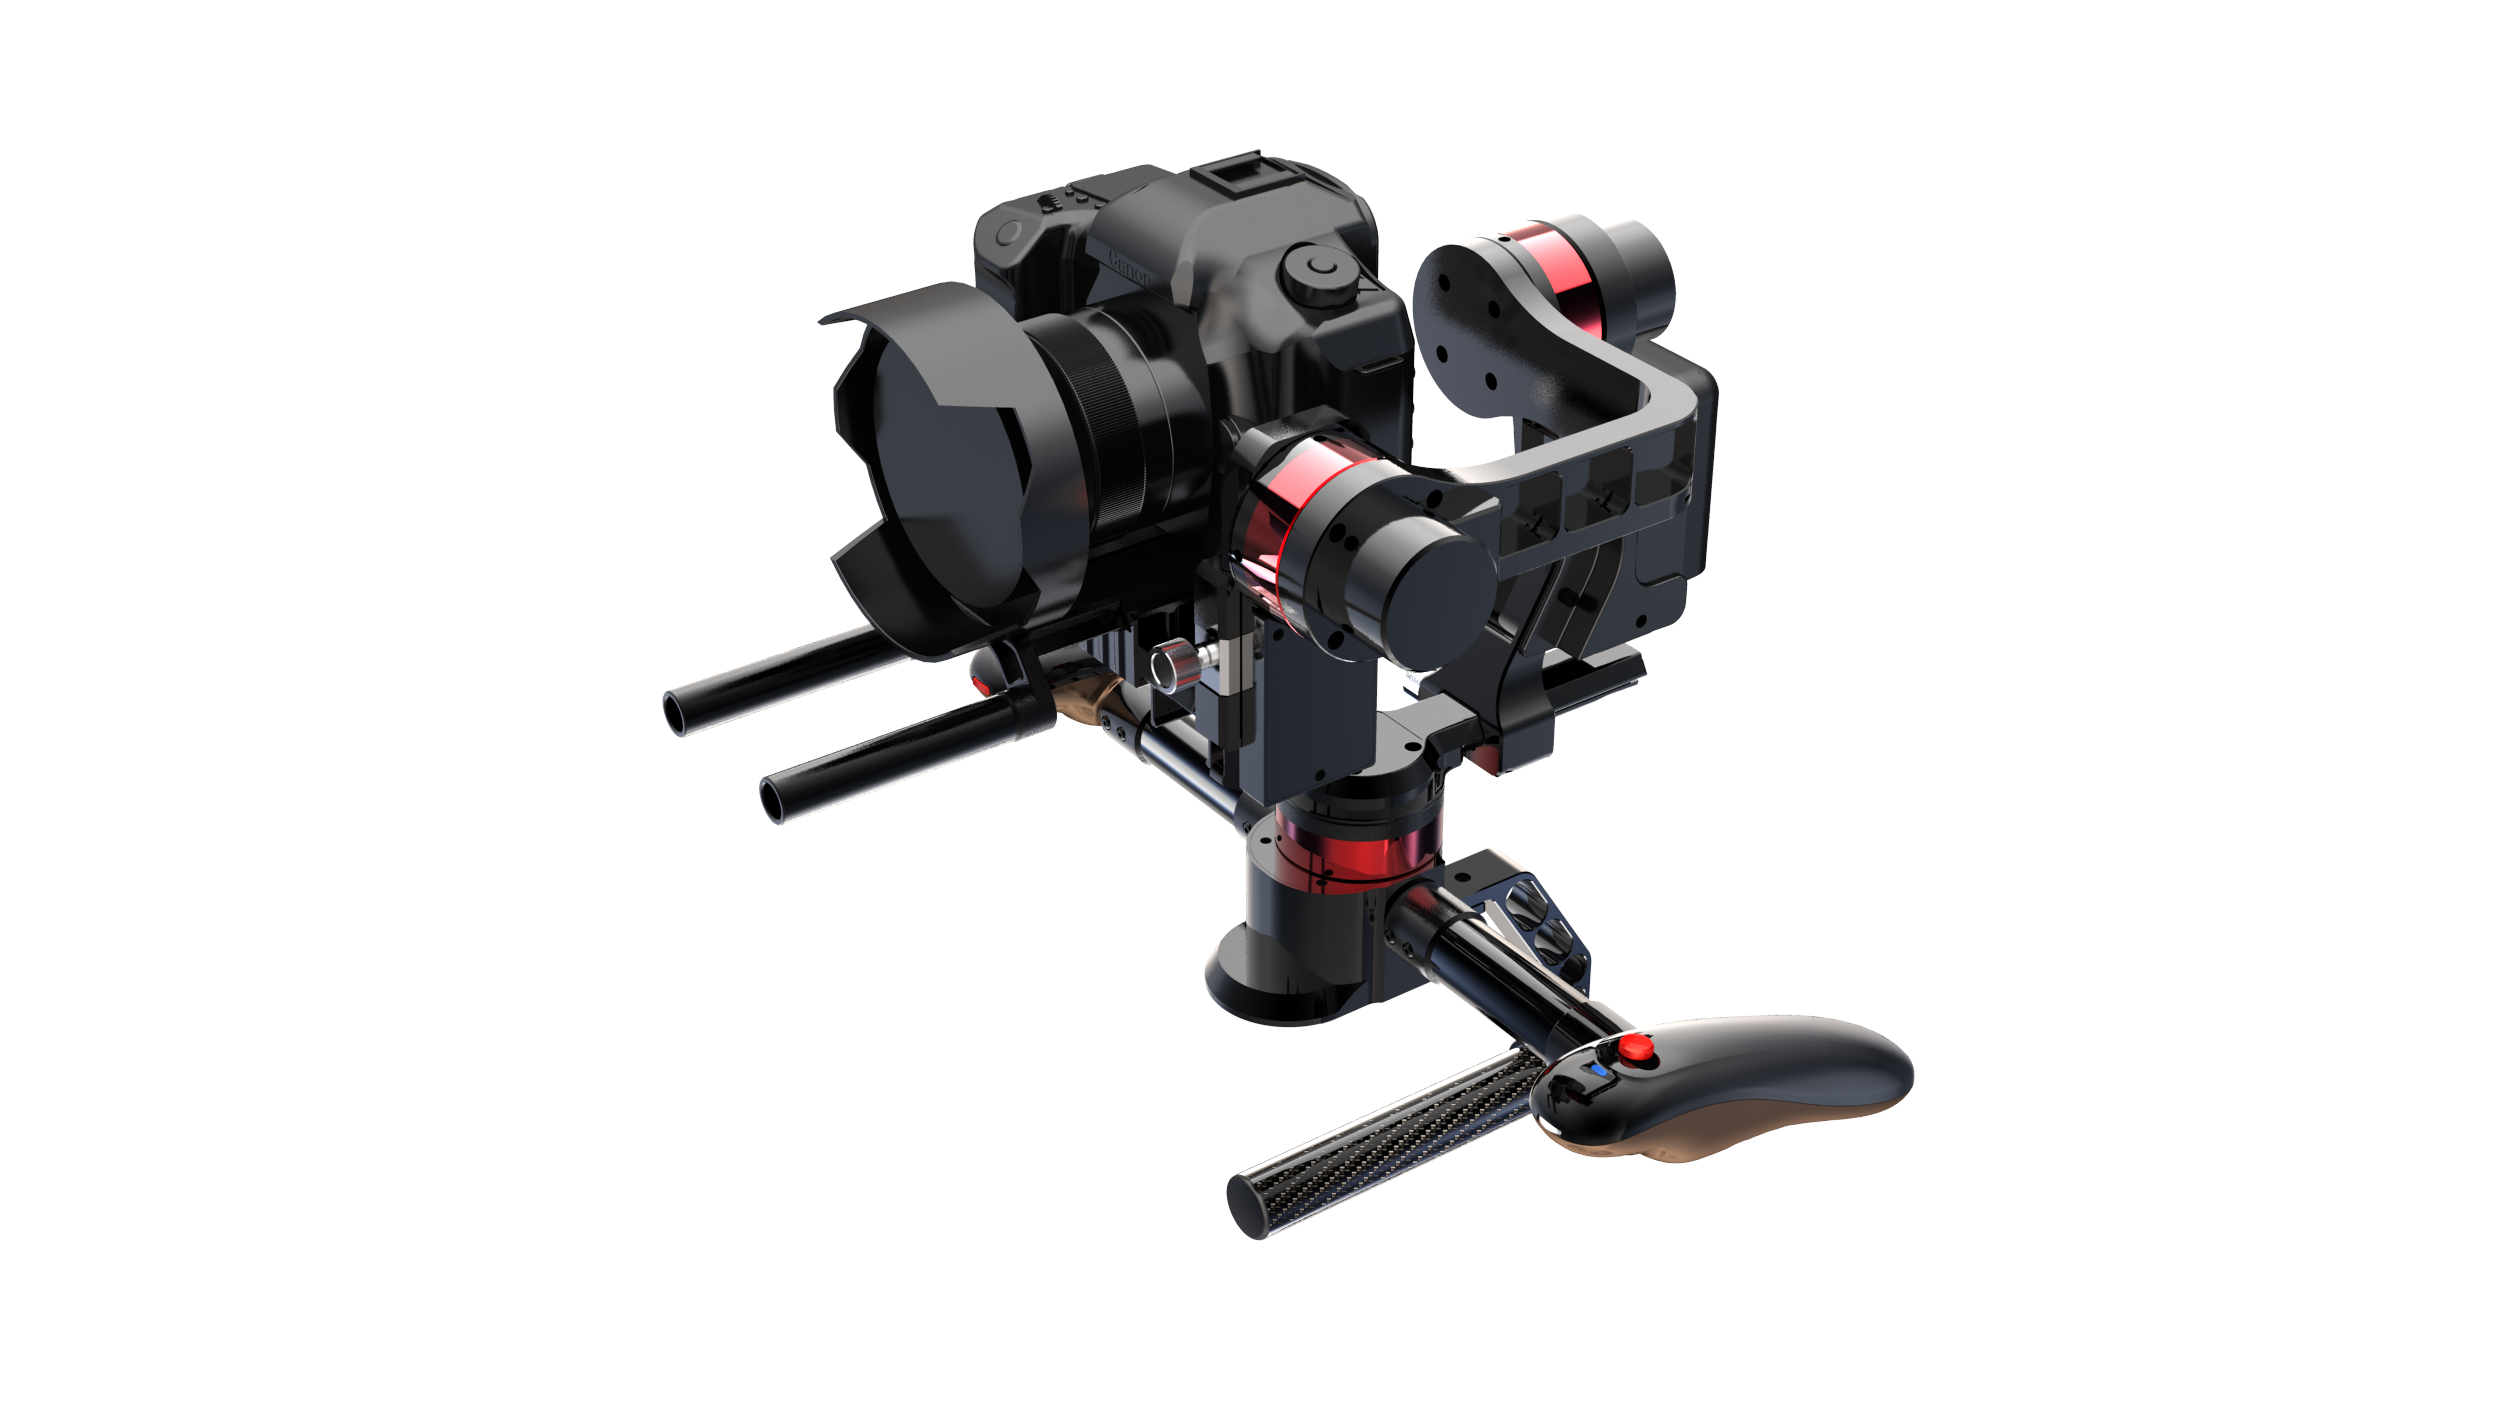 smooth video gimbal stabilizer